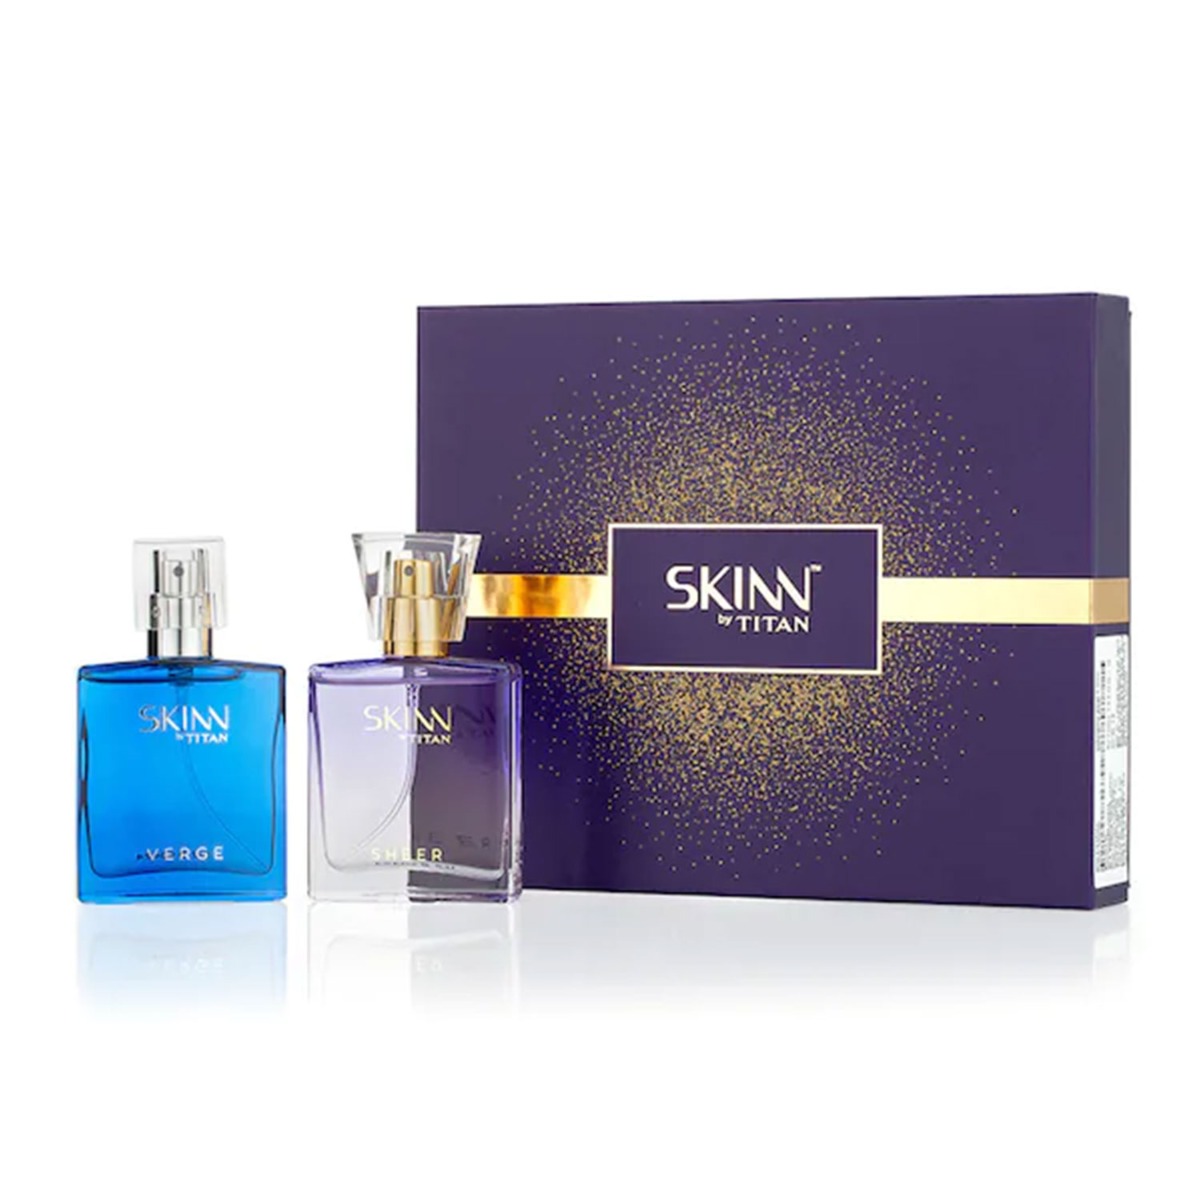 Skinn by Titan Verge and Sheer Perfumes for Men and Women, 50ml (Pack Of 2)